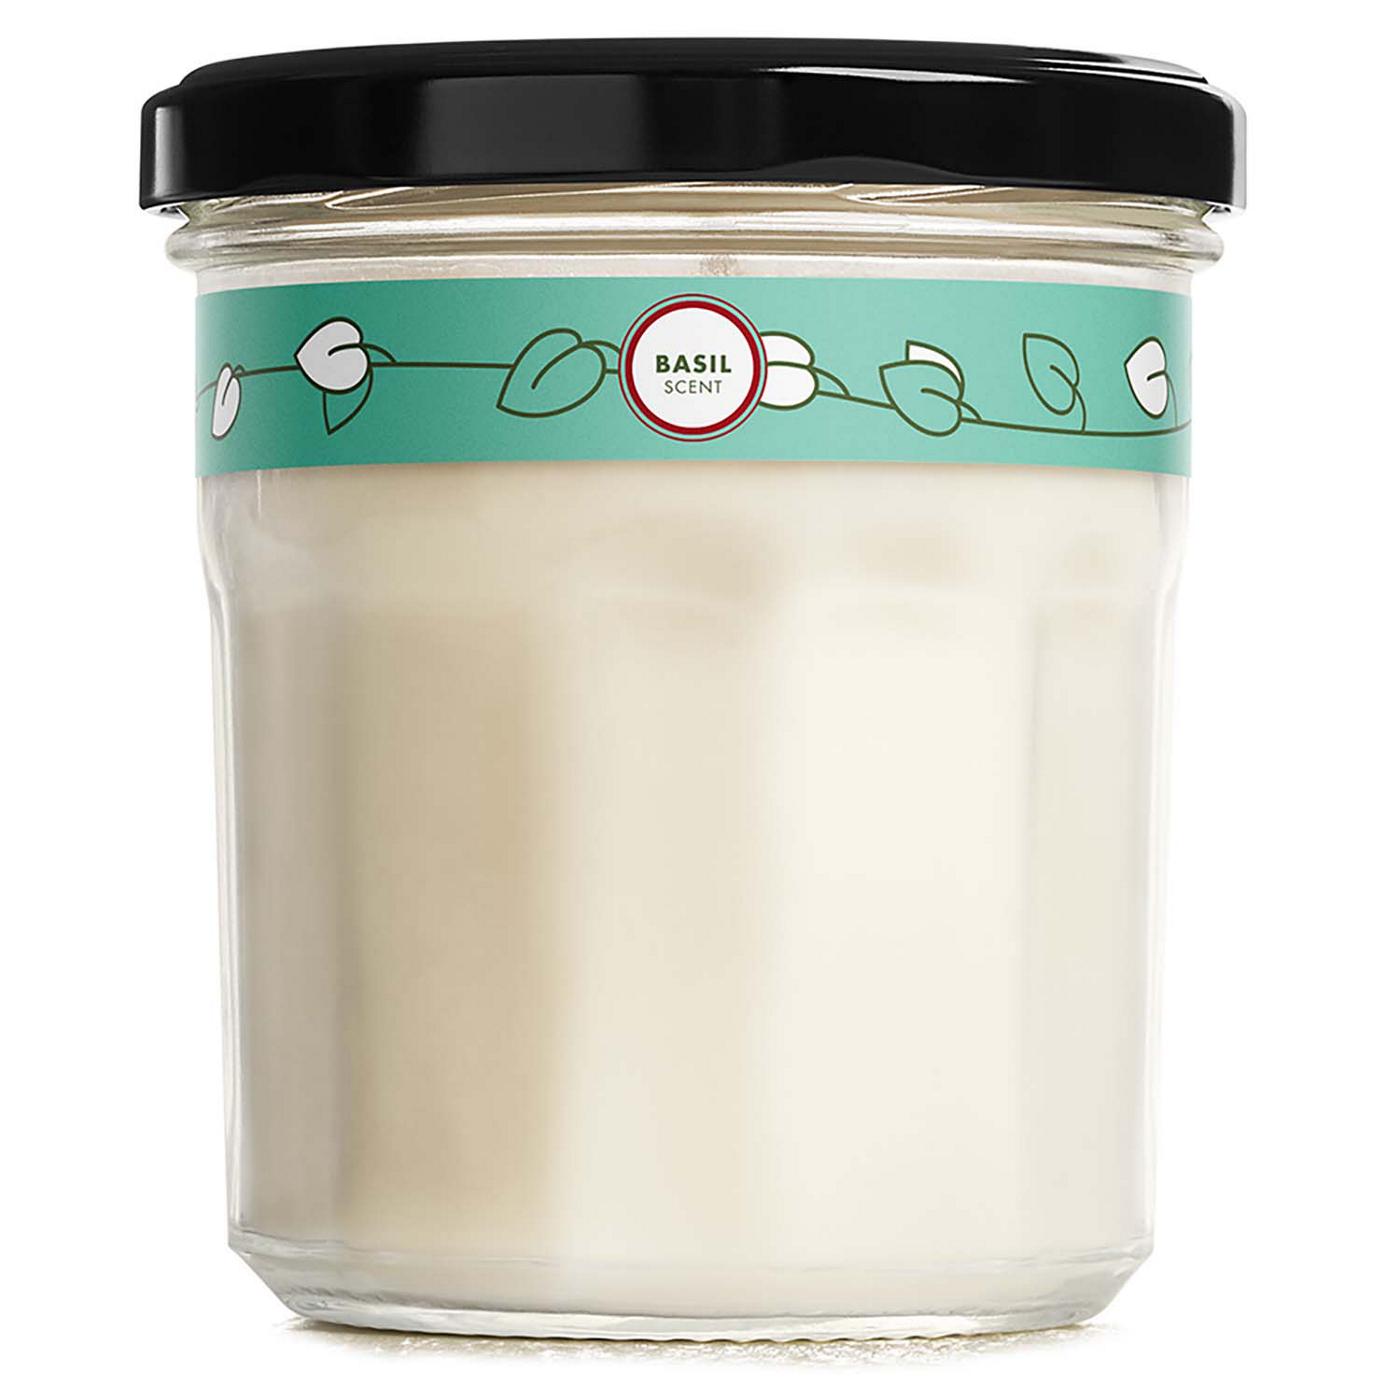 Mrs. Meyer's Clean Day Basil Soy Candle; image 1 of 6